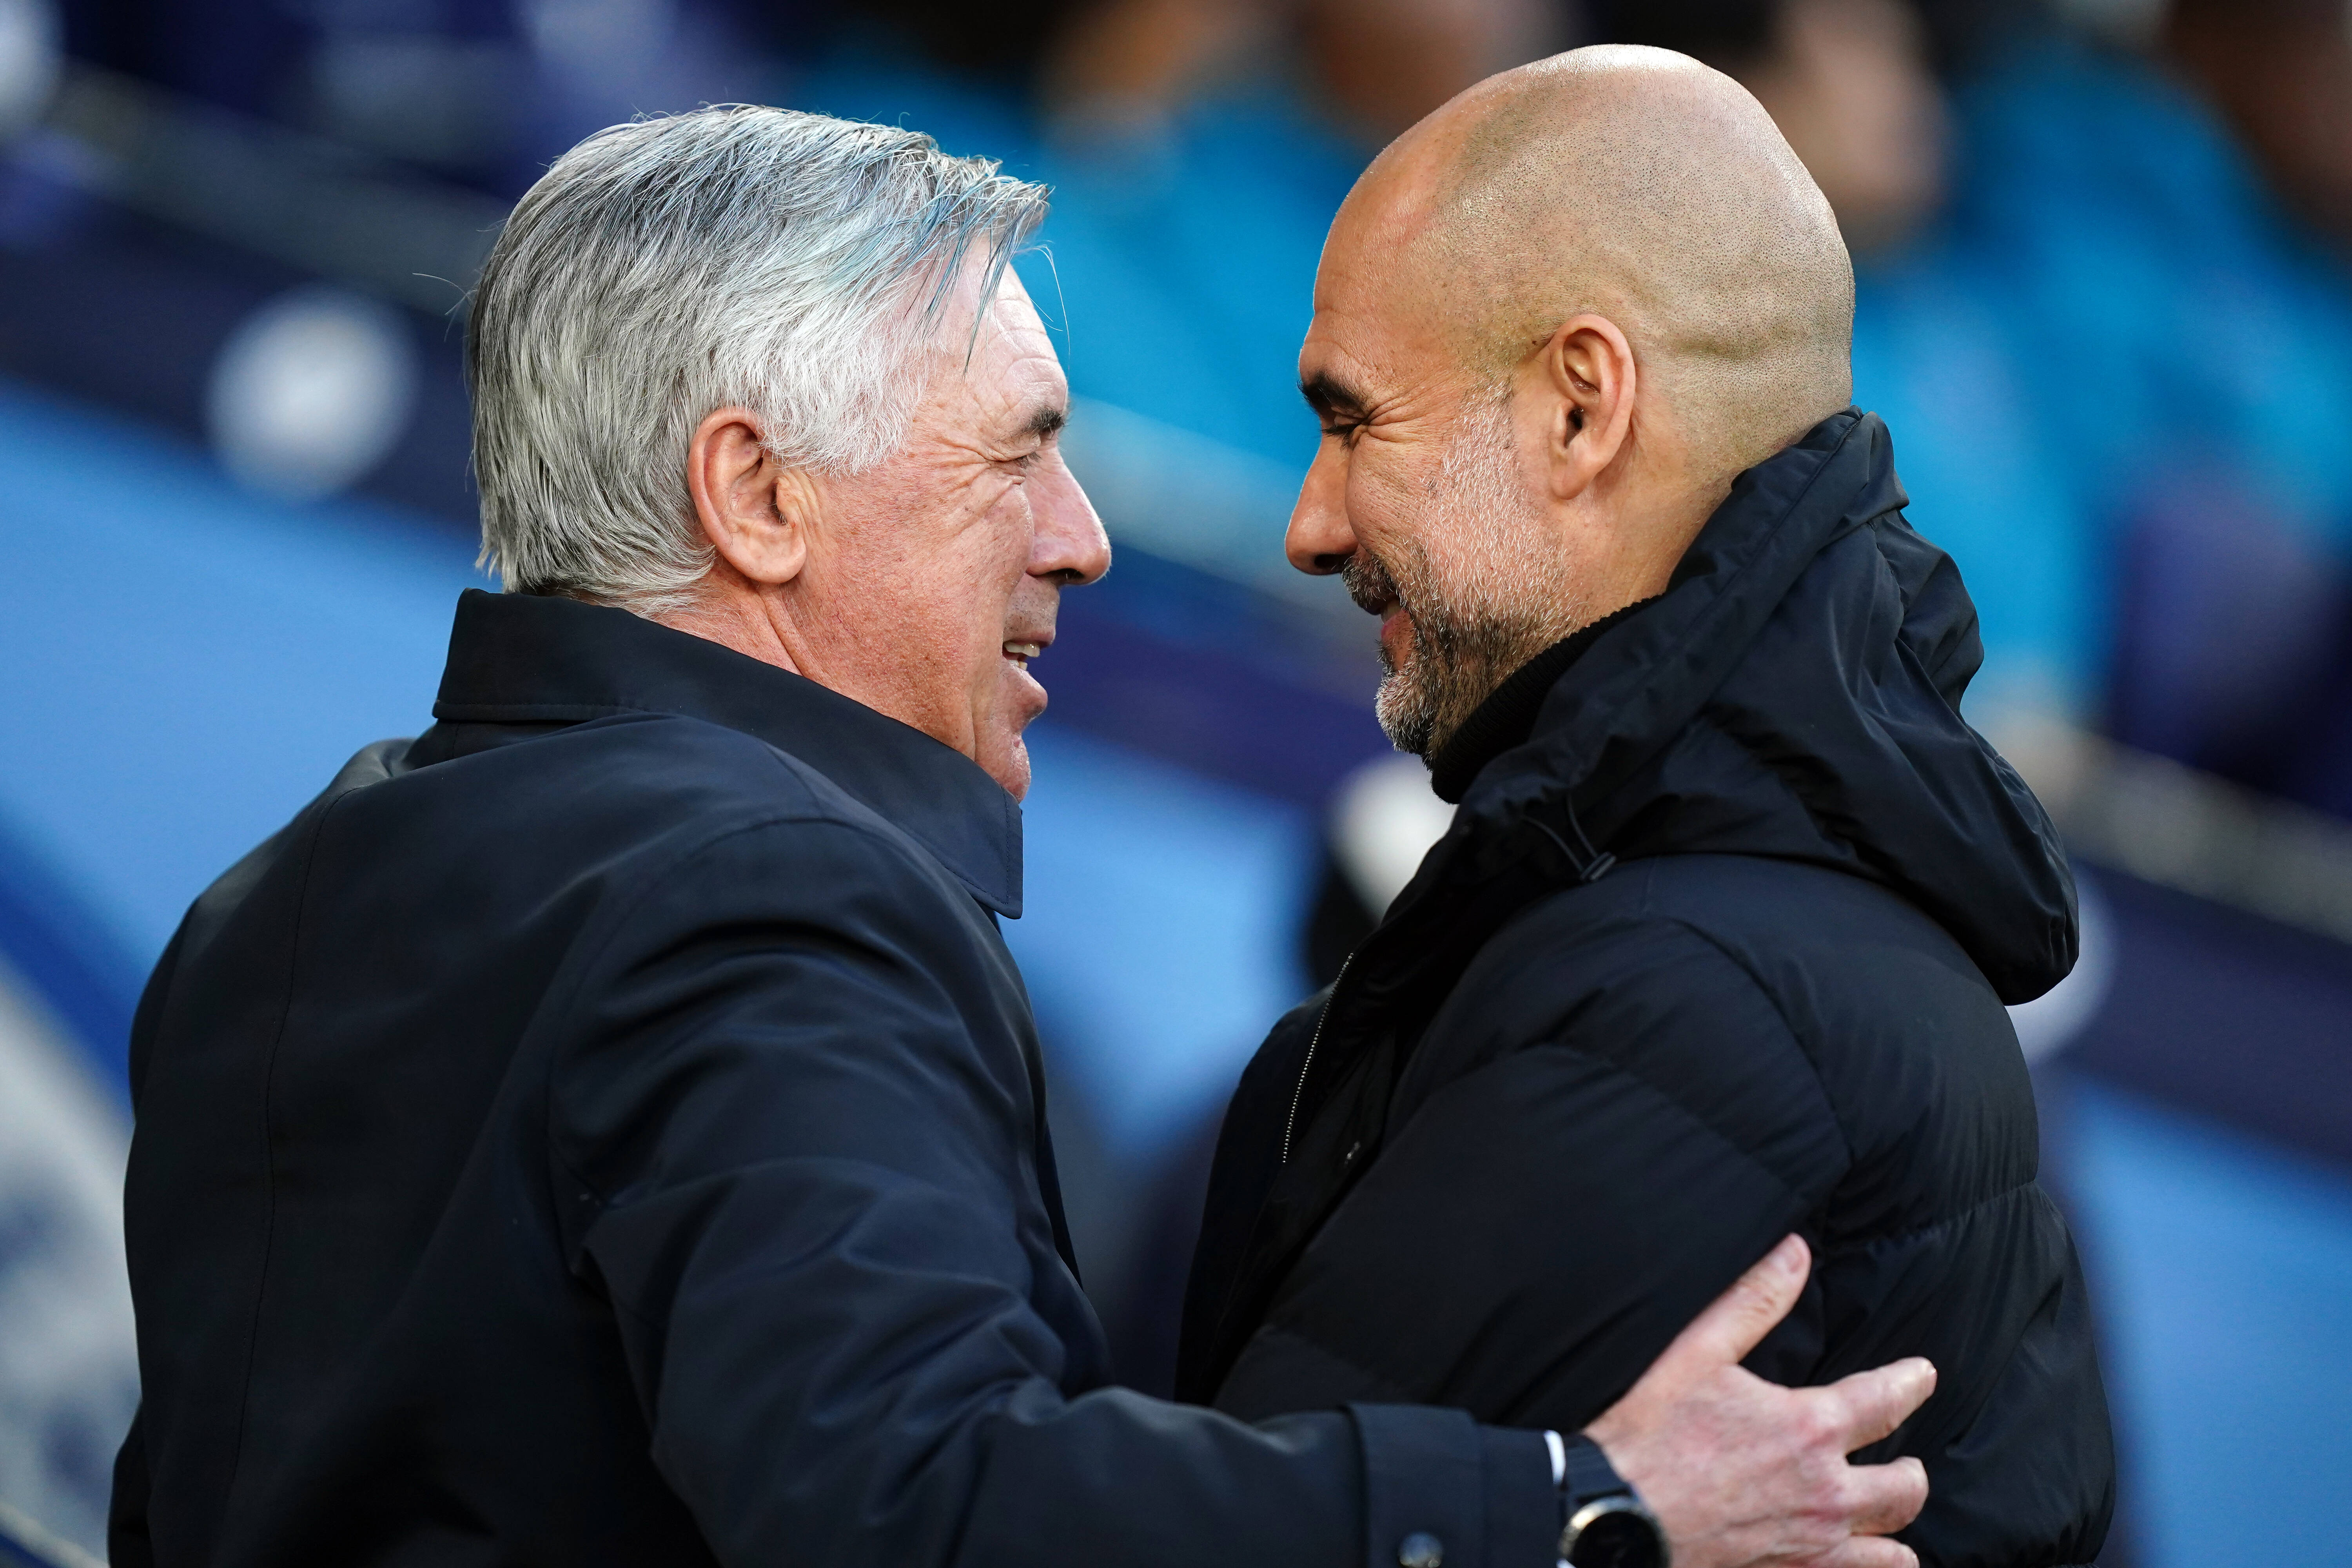 Pep Guardiola and Carlo Ancelotti come together after the match 